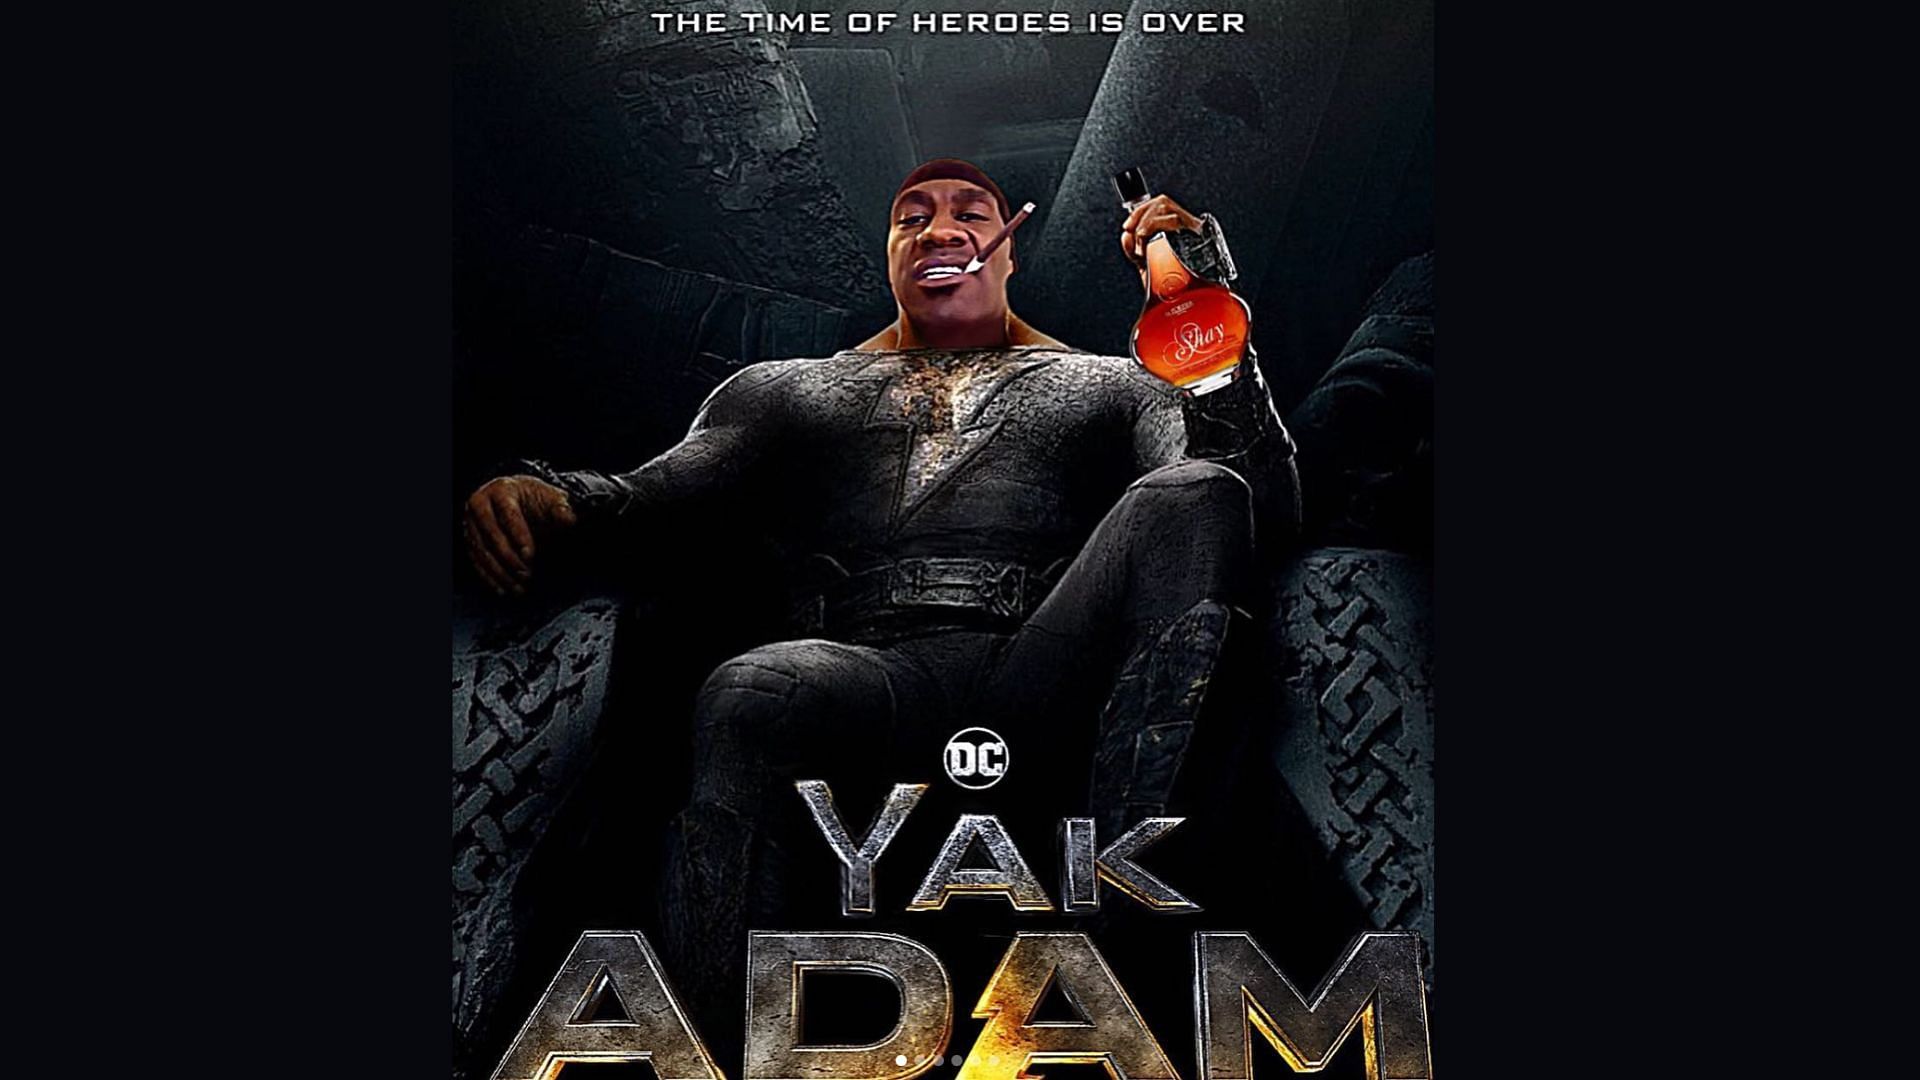 &quot;Yak Adam&quot; image shared by Sharpe on his Instagram